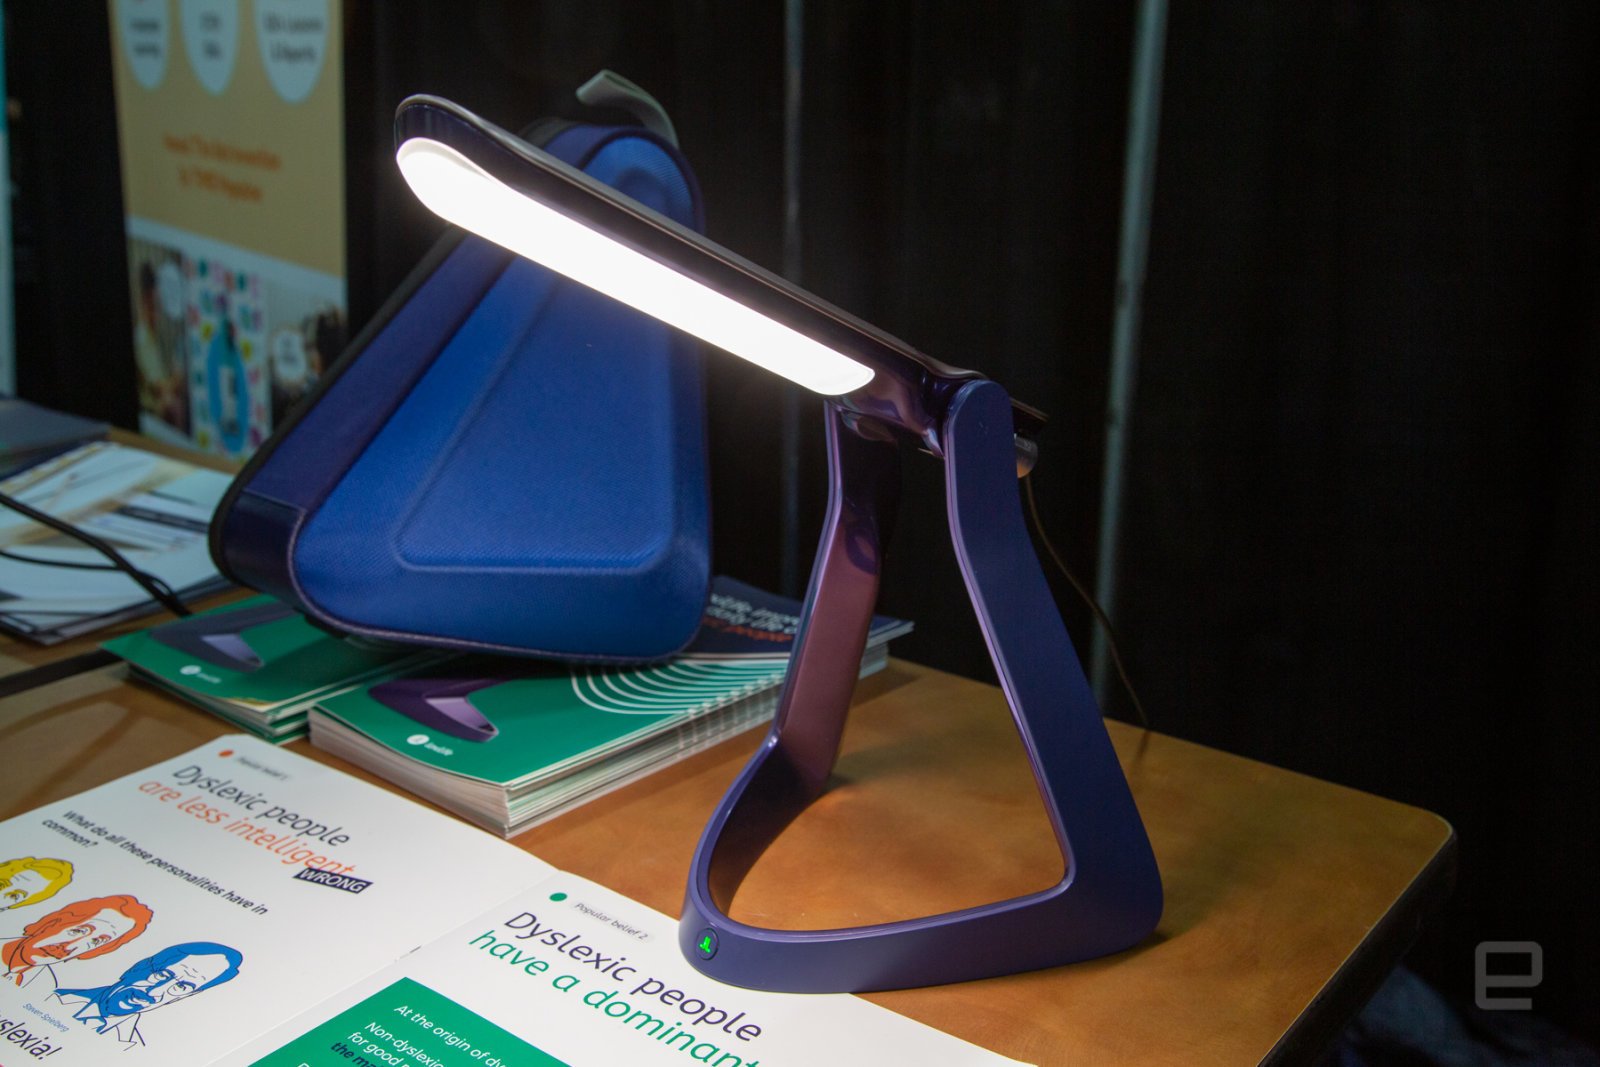 Lexilife unveils the Lexilight lamp designed for people with dyslexia -  Gizmochina